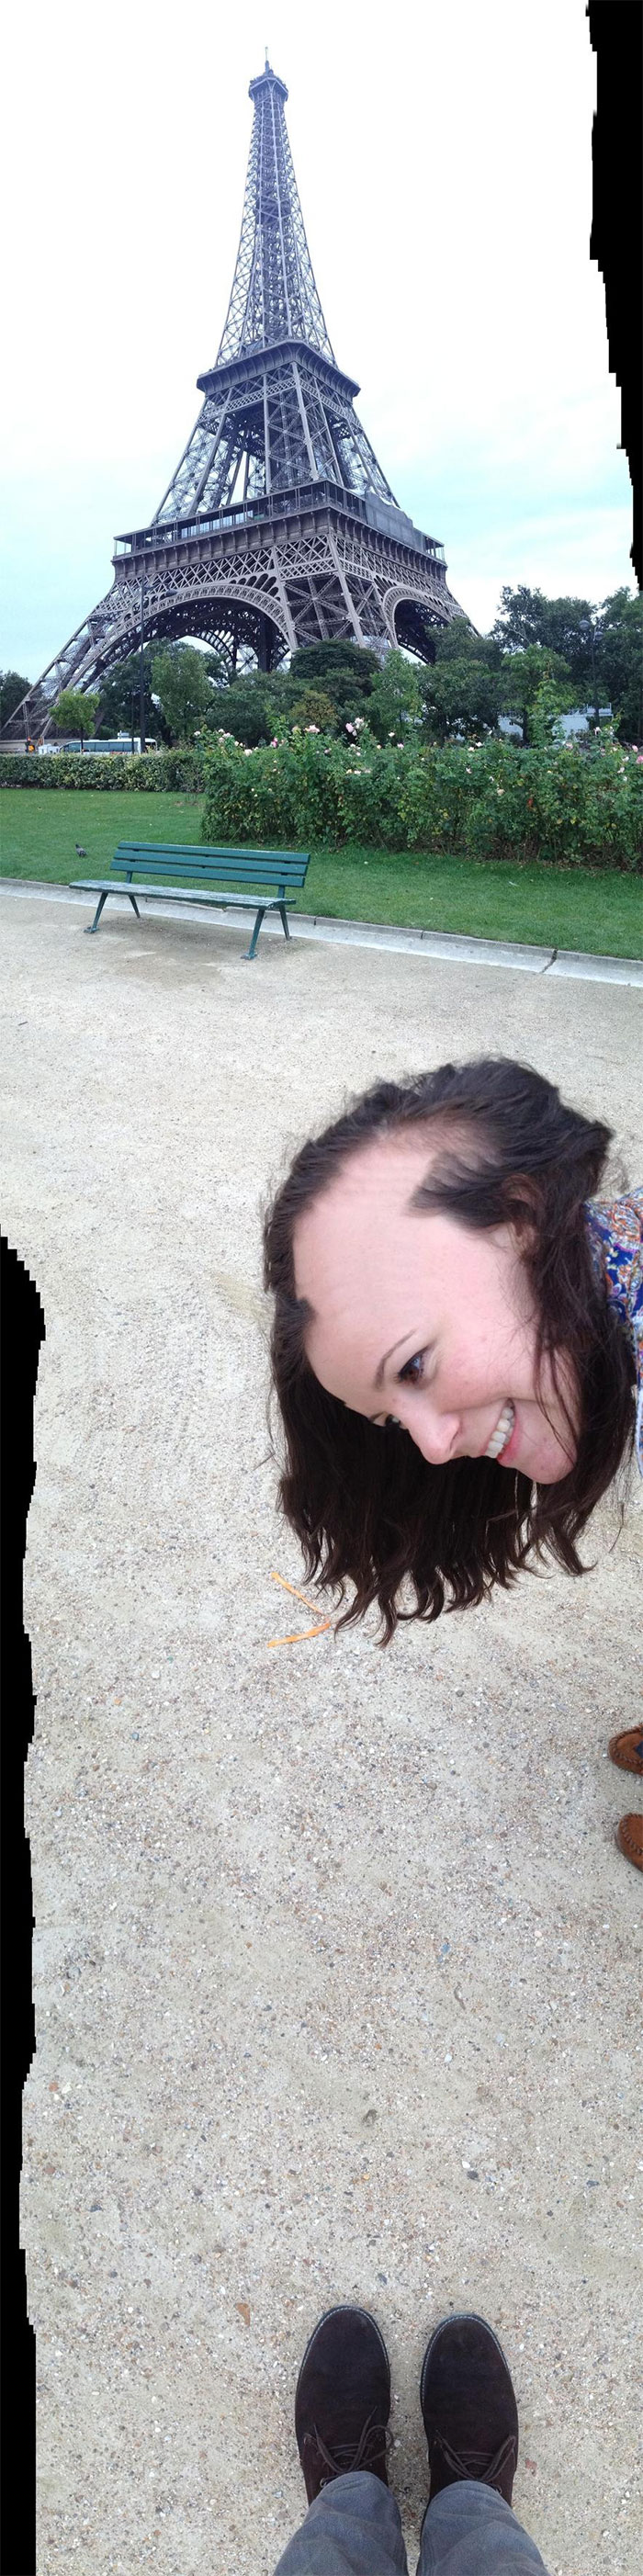 Tried Getting A Vertical Panoramic Shot Of The Eiffel Tower, But Instead I Turned My Girlfriend Into Skrillex